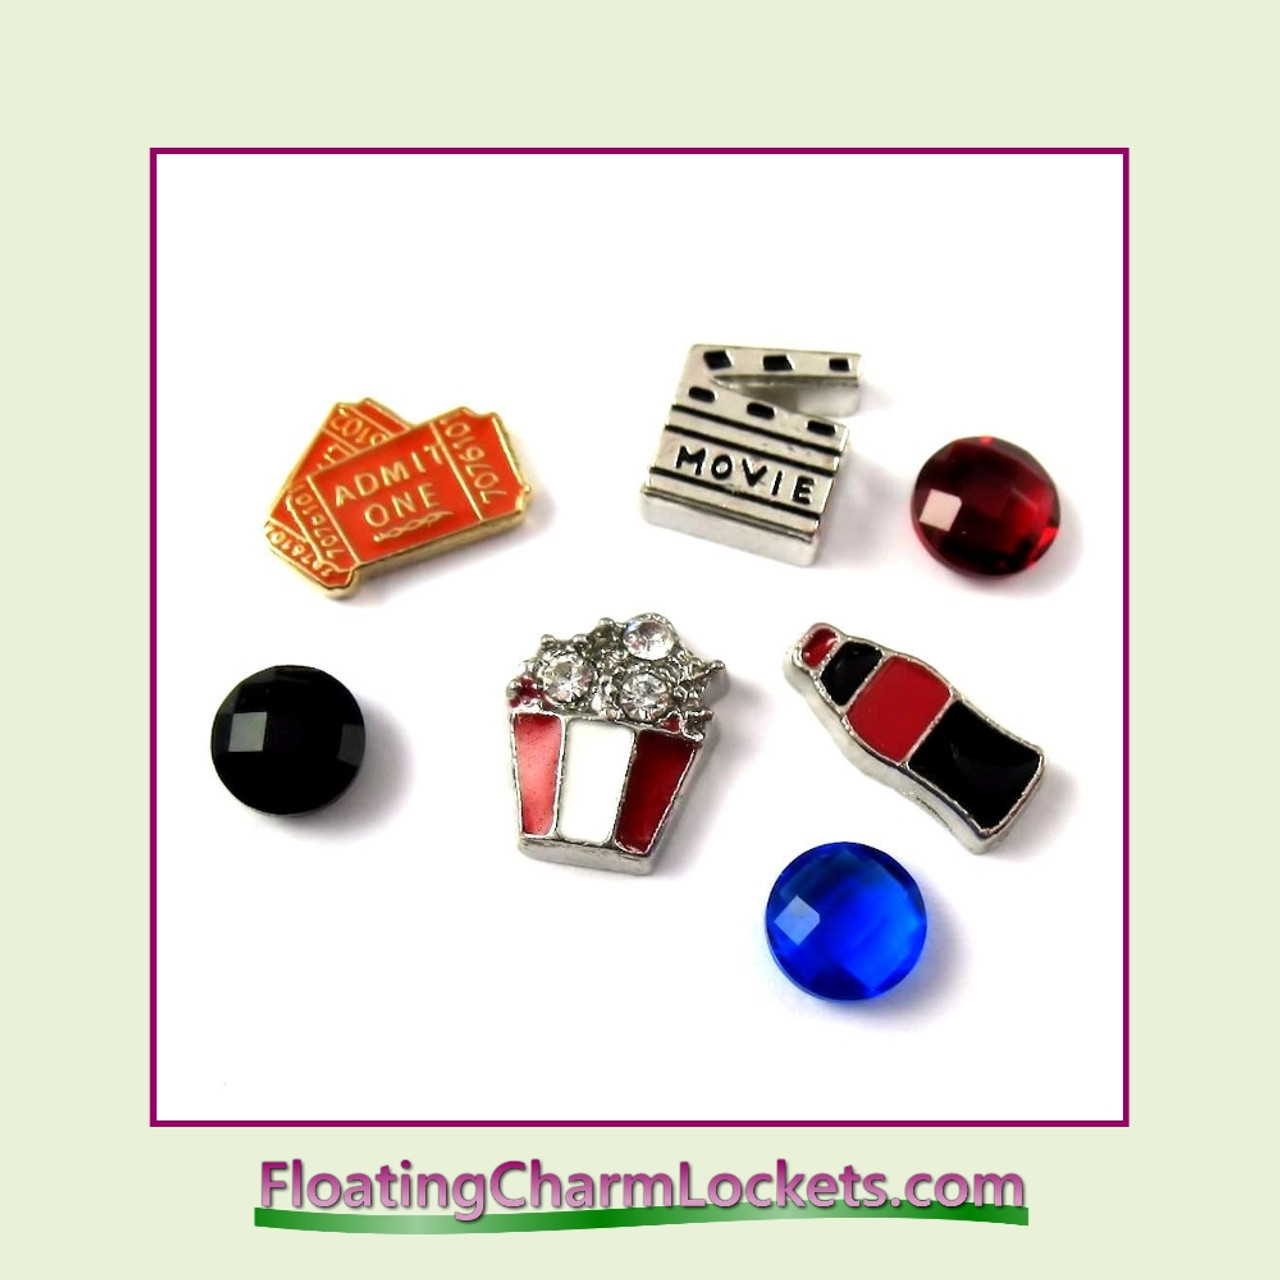 Floating Charm Lockets and Floating Charms, FCL LLC